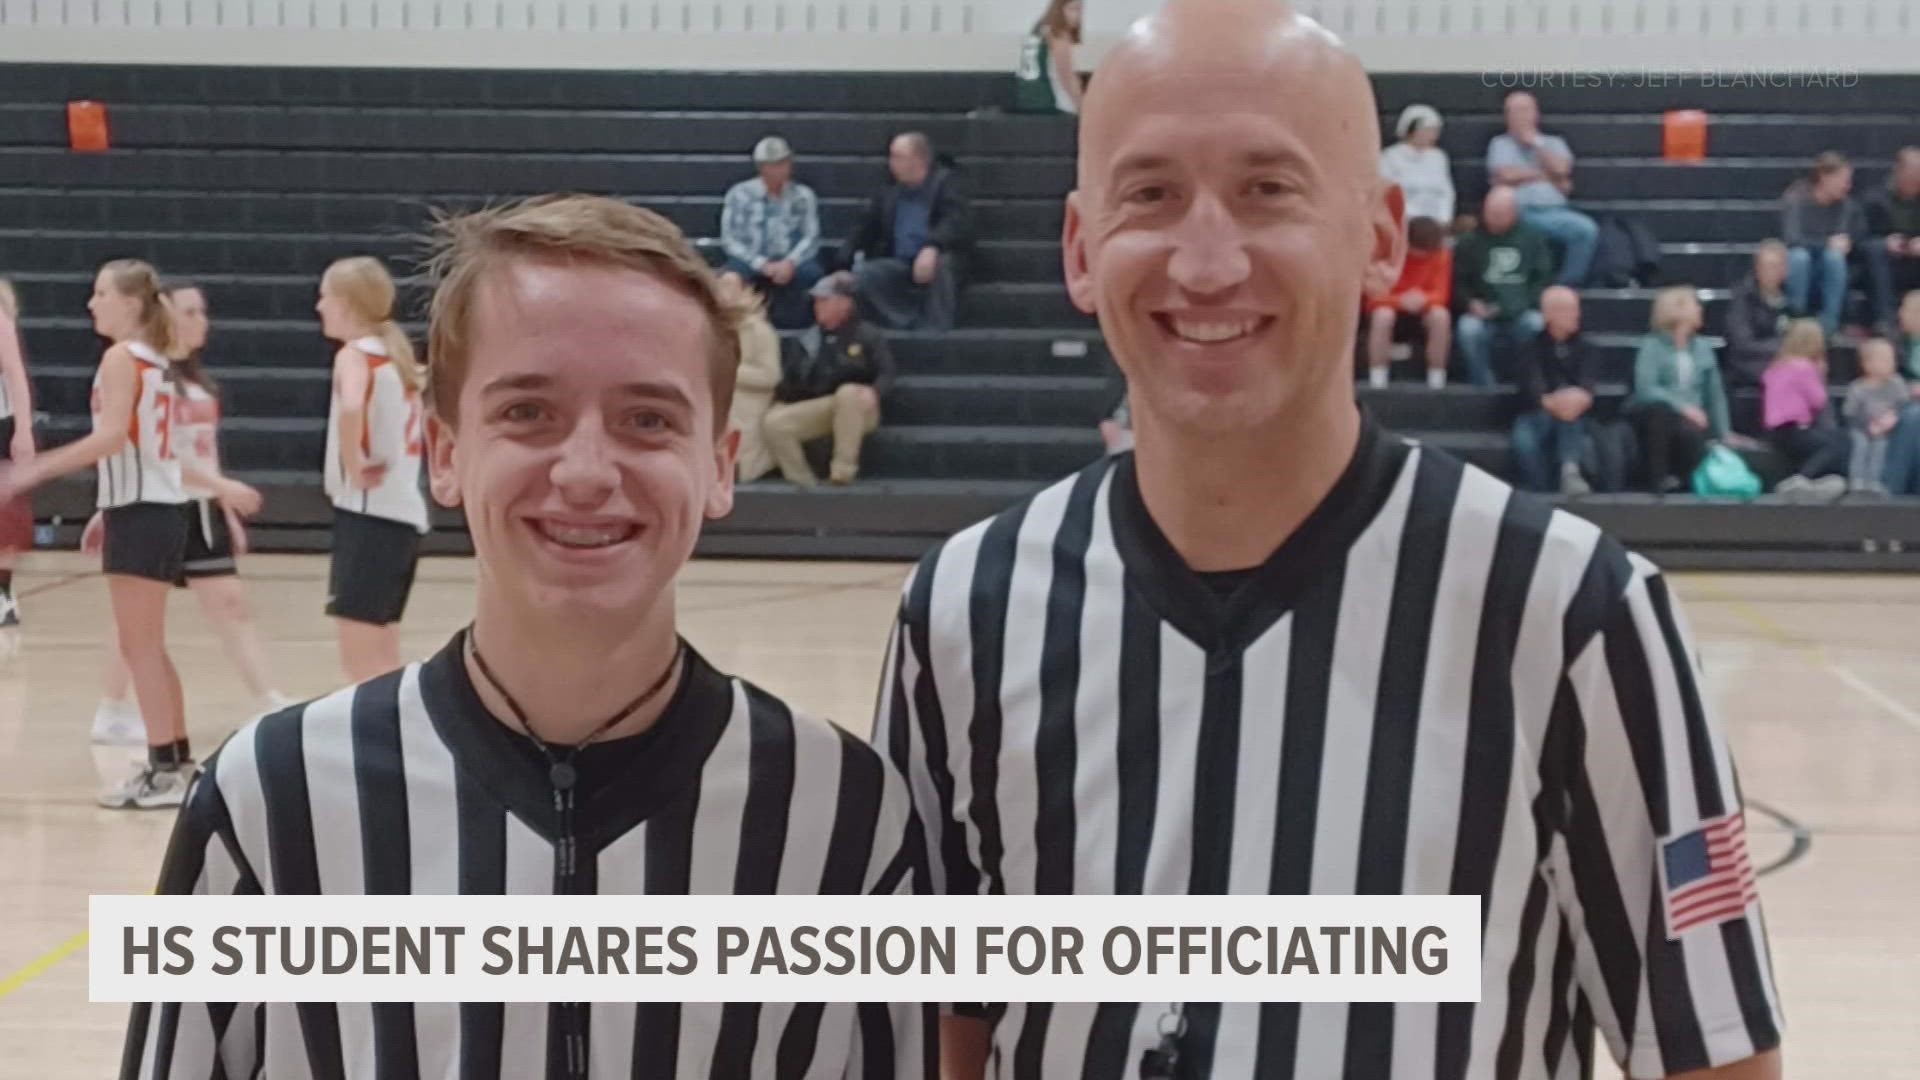 For the Blanchards, officiating is a family affair. Beaux's dad, older sister and younger brother are also referees.